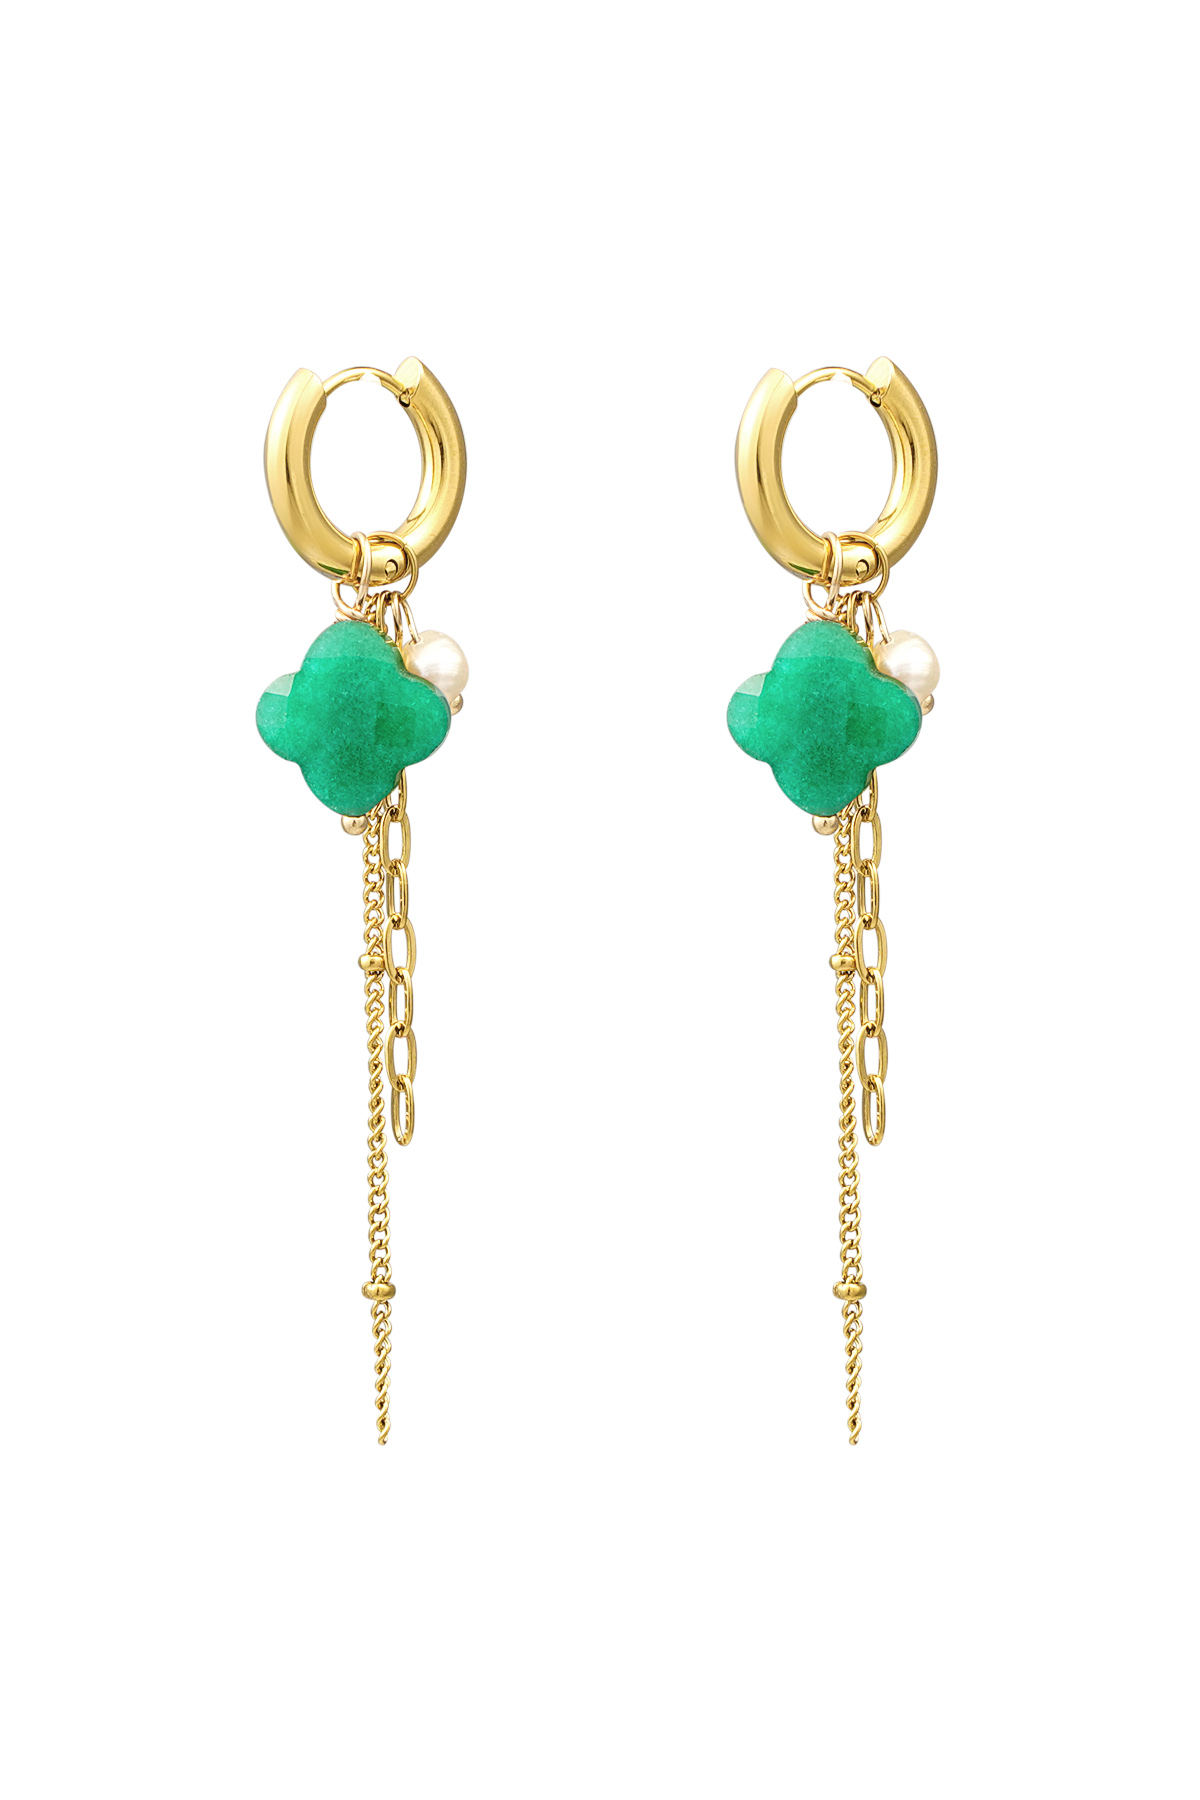 Clover earrings with chains - gold/green 